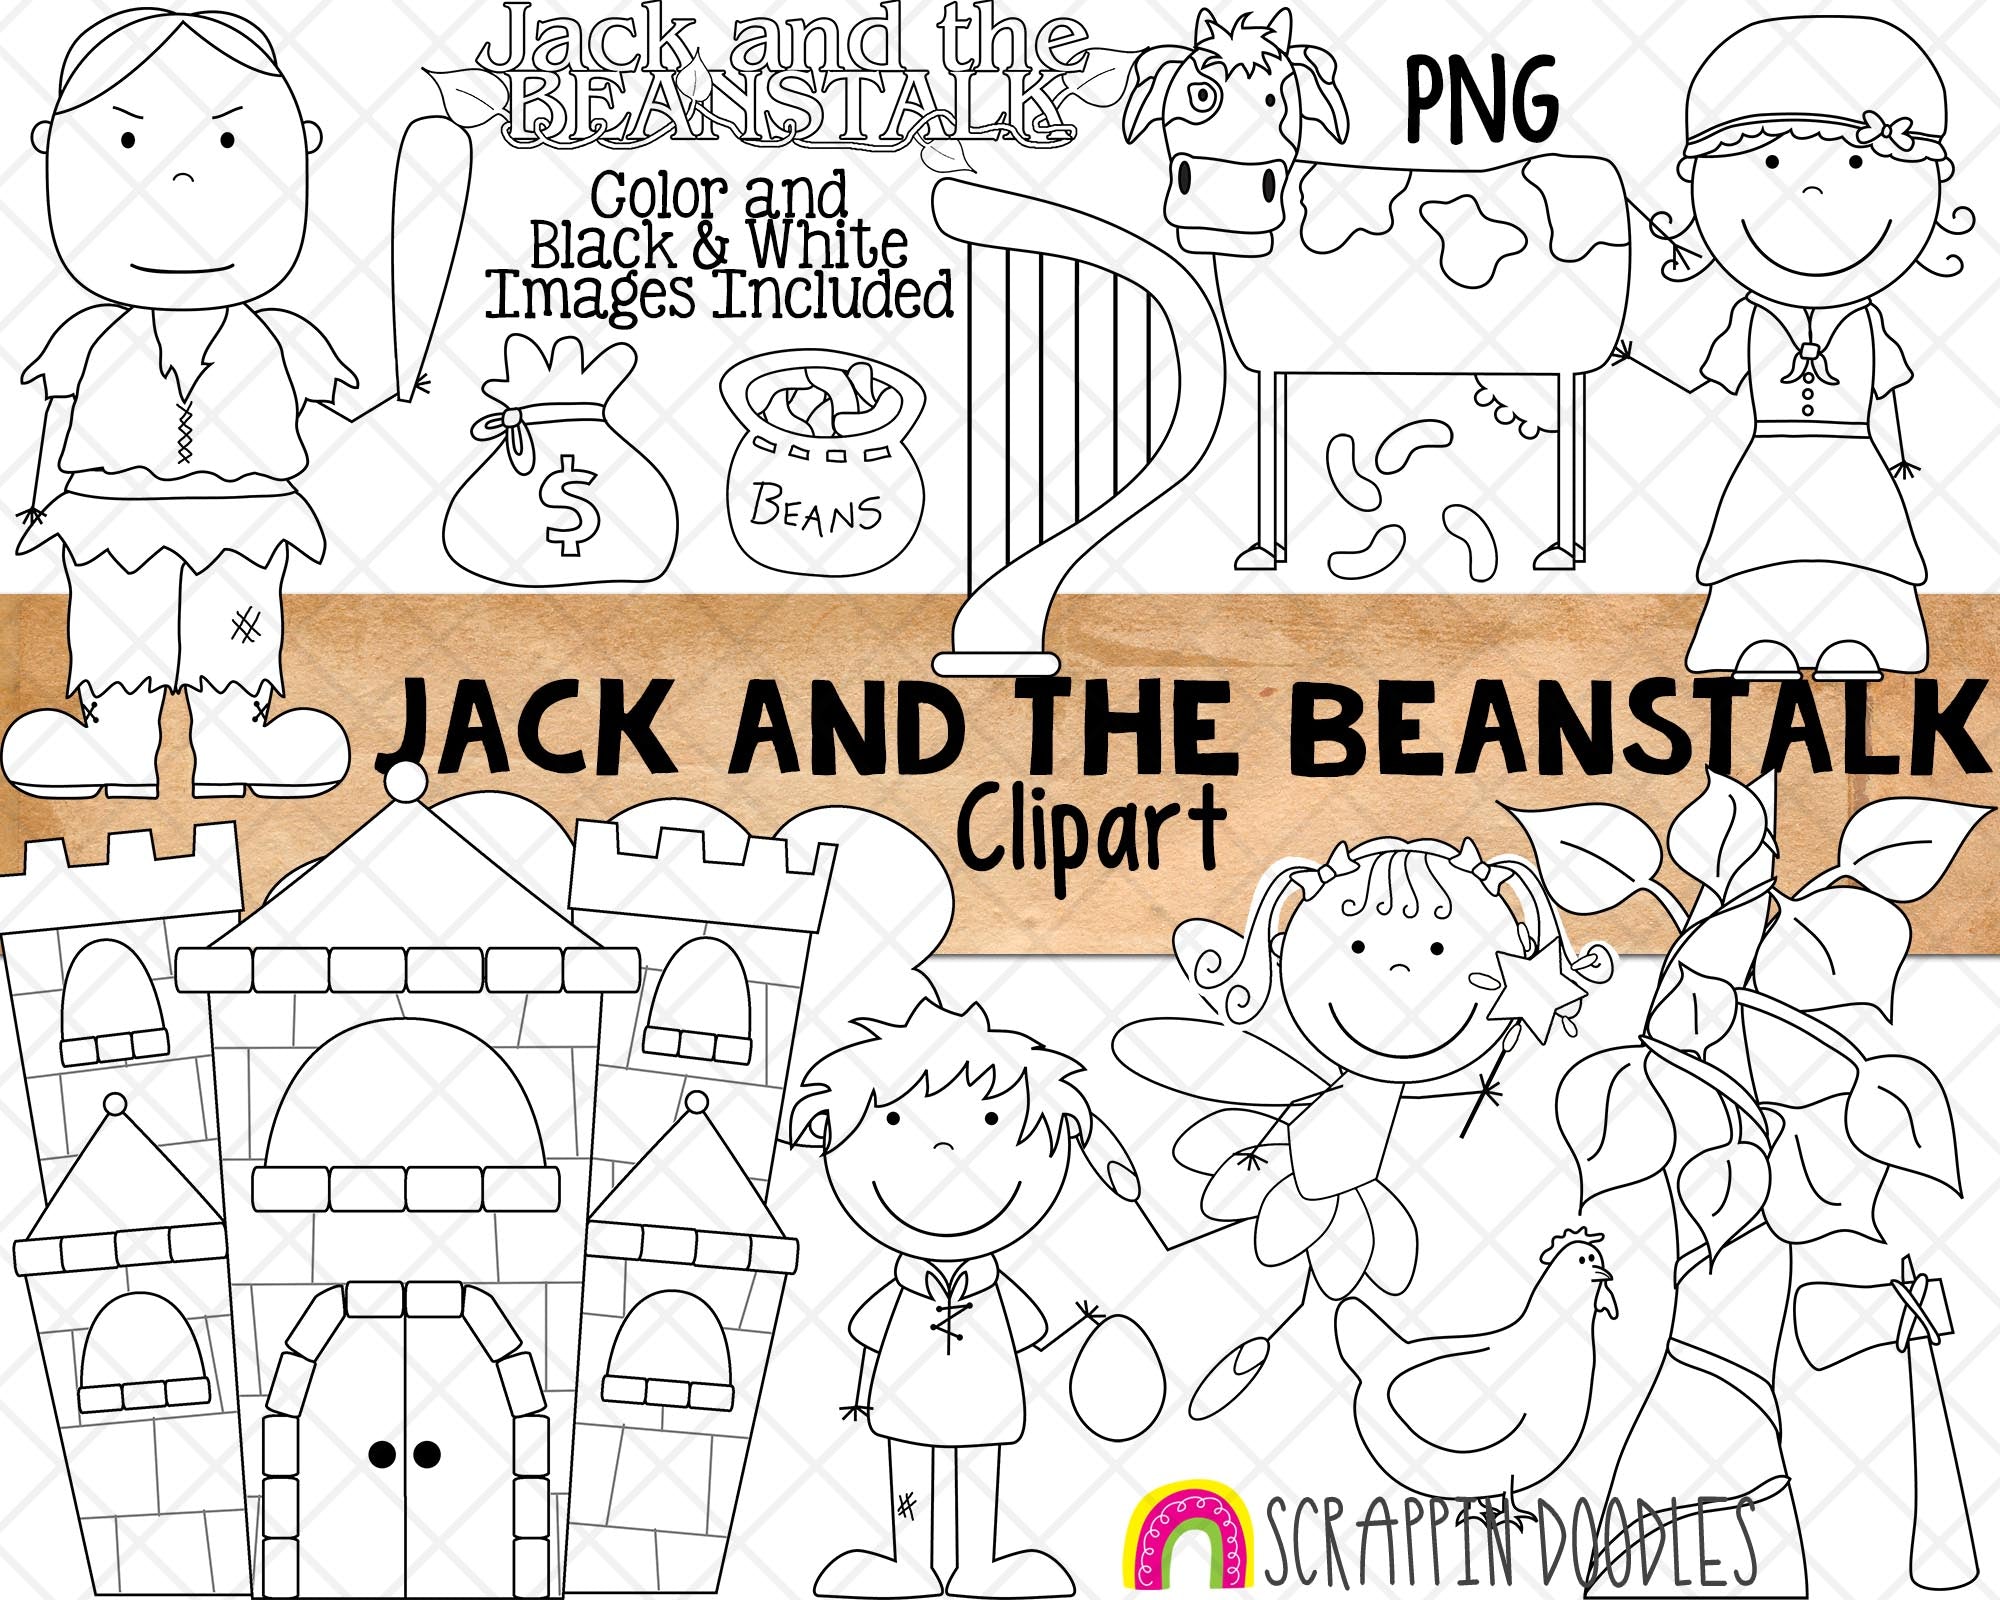 Jack and the Beanstalk Clip Art  Jack and the beanstalk, Clip art, Fairy  tales